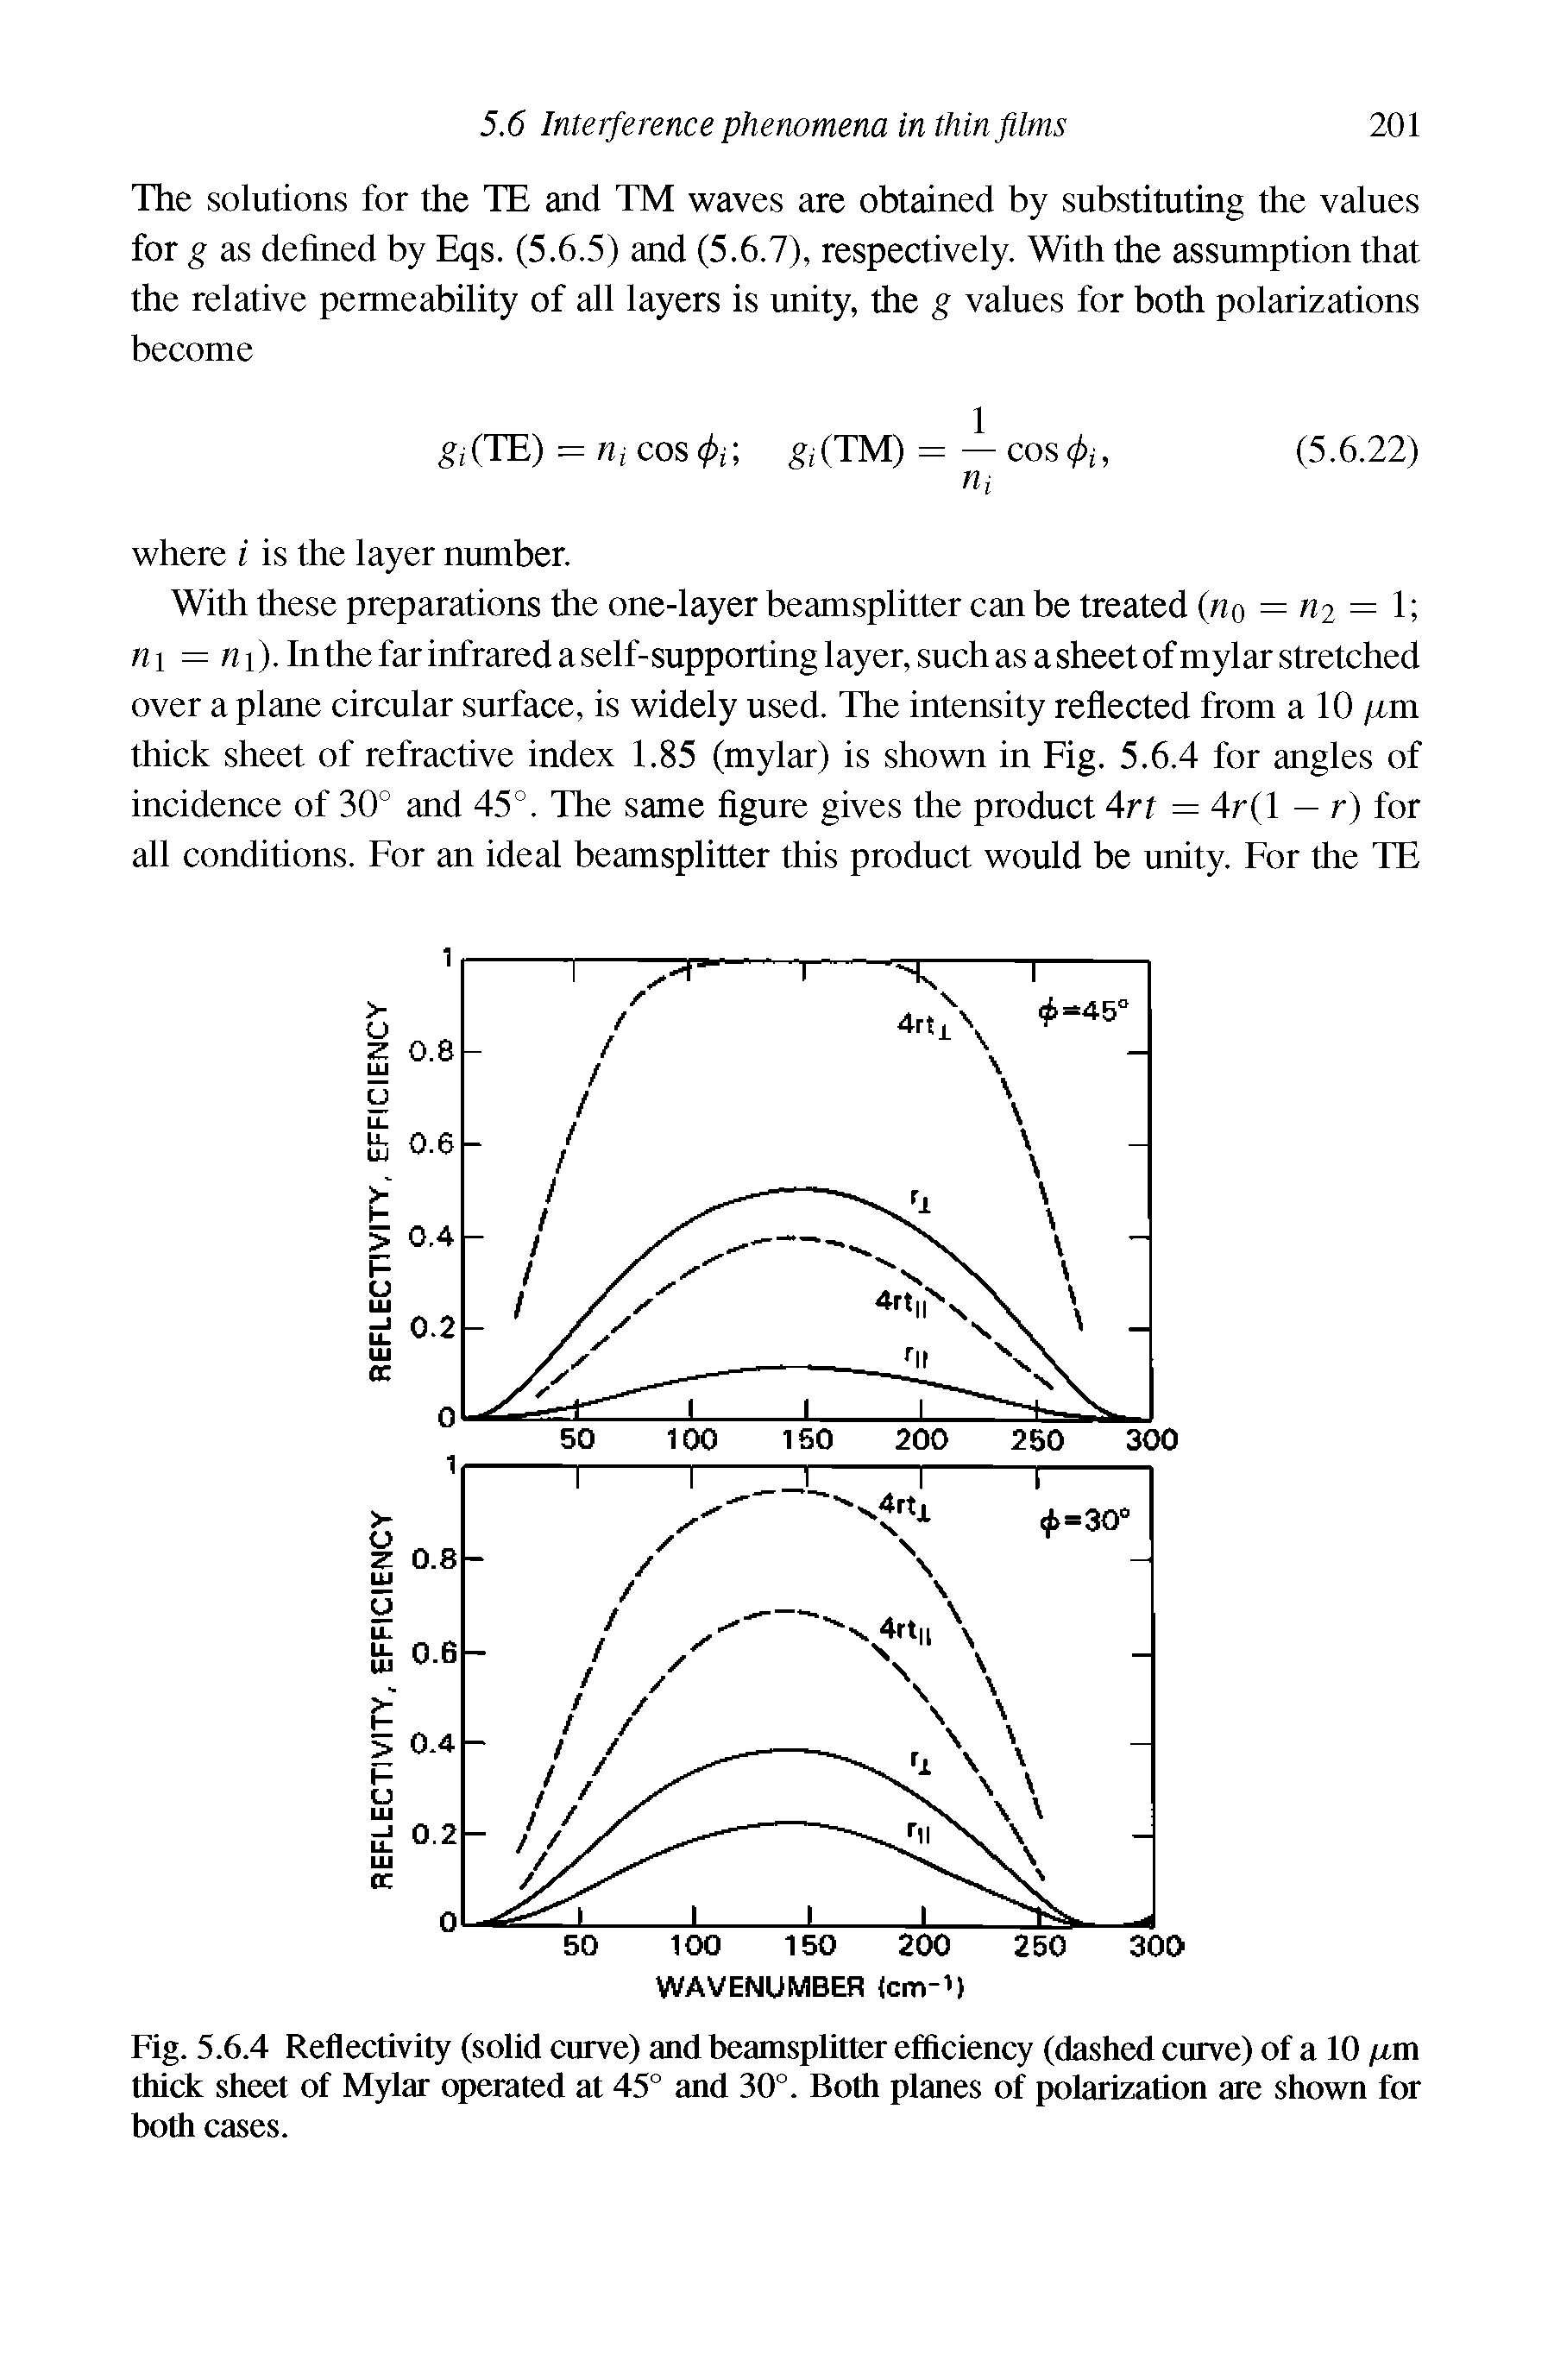 Fig. 5.6.4 Reflectivity (solid curve) and beamsplitter efficiency (dashed curve) of a 10 /xm thick sheet of Mylar operated at 45° and 30°. Both planes of polarization are shown for both cases.